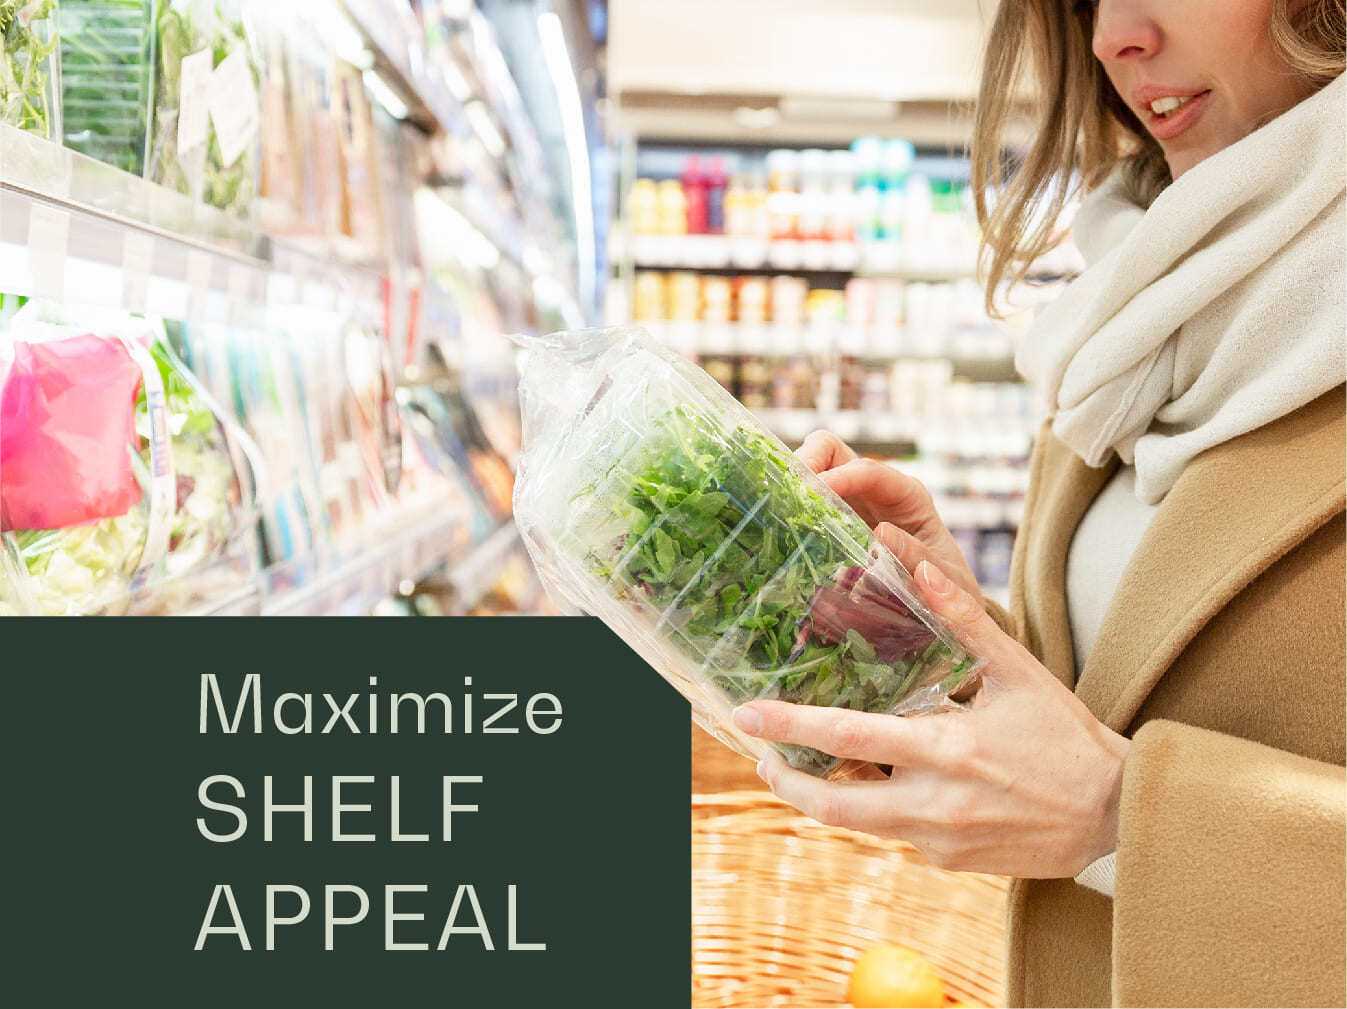 5 Types of Food Packaging to Maximize Shelf Appeal featured image